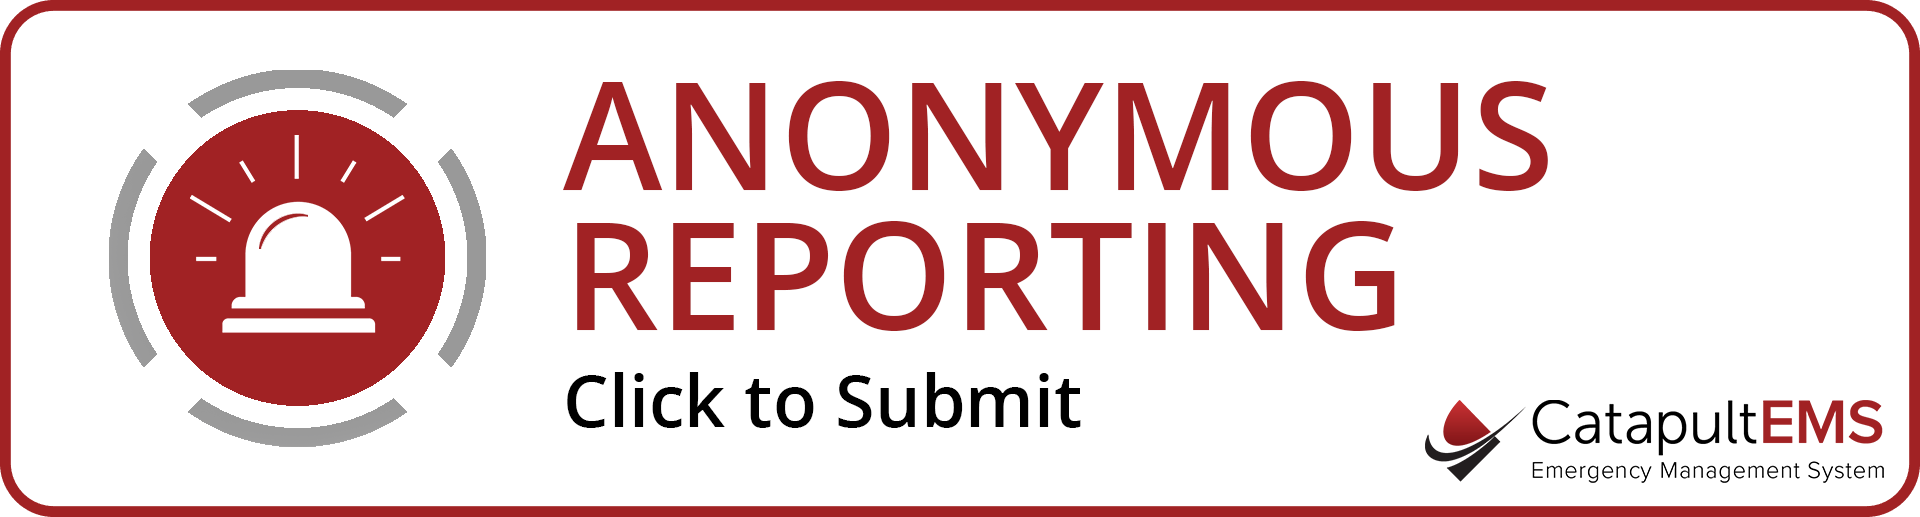 Anonymous Reporting.  Click here to report!